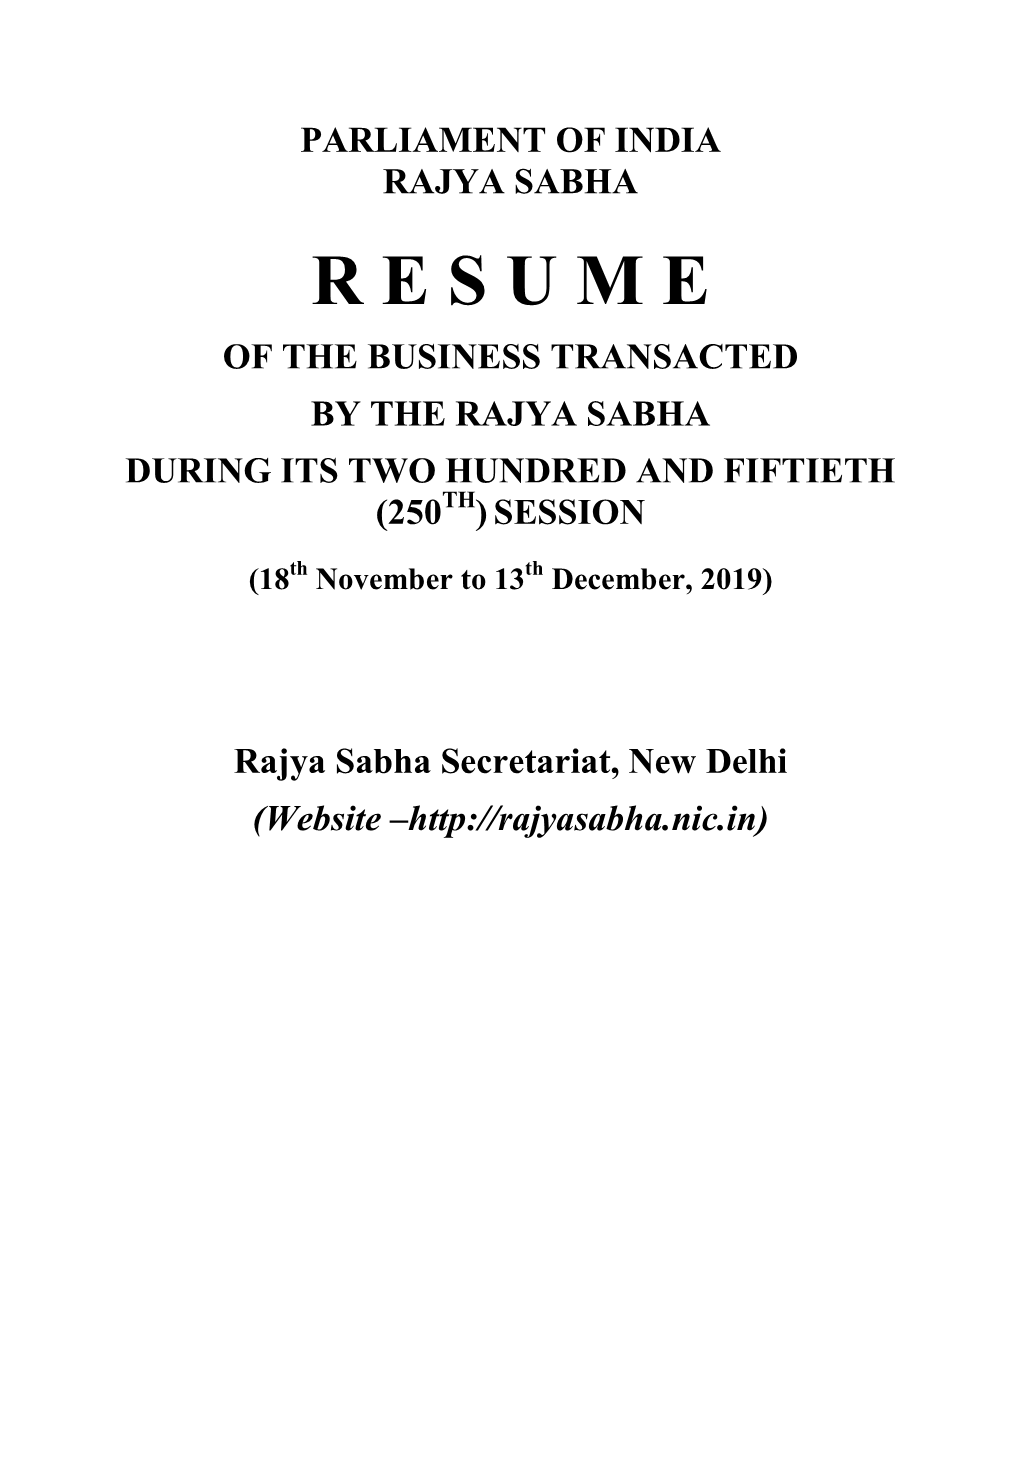 R E S U M E of the Business Transacted by the Rajya Sabha During Its Two Hundred and Fiftieth (250Th) Session